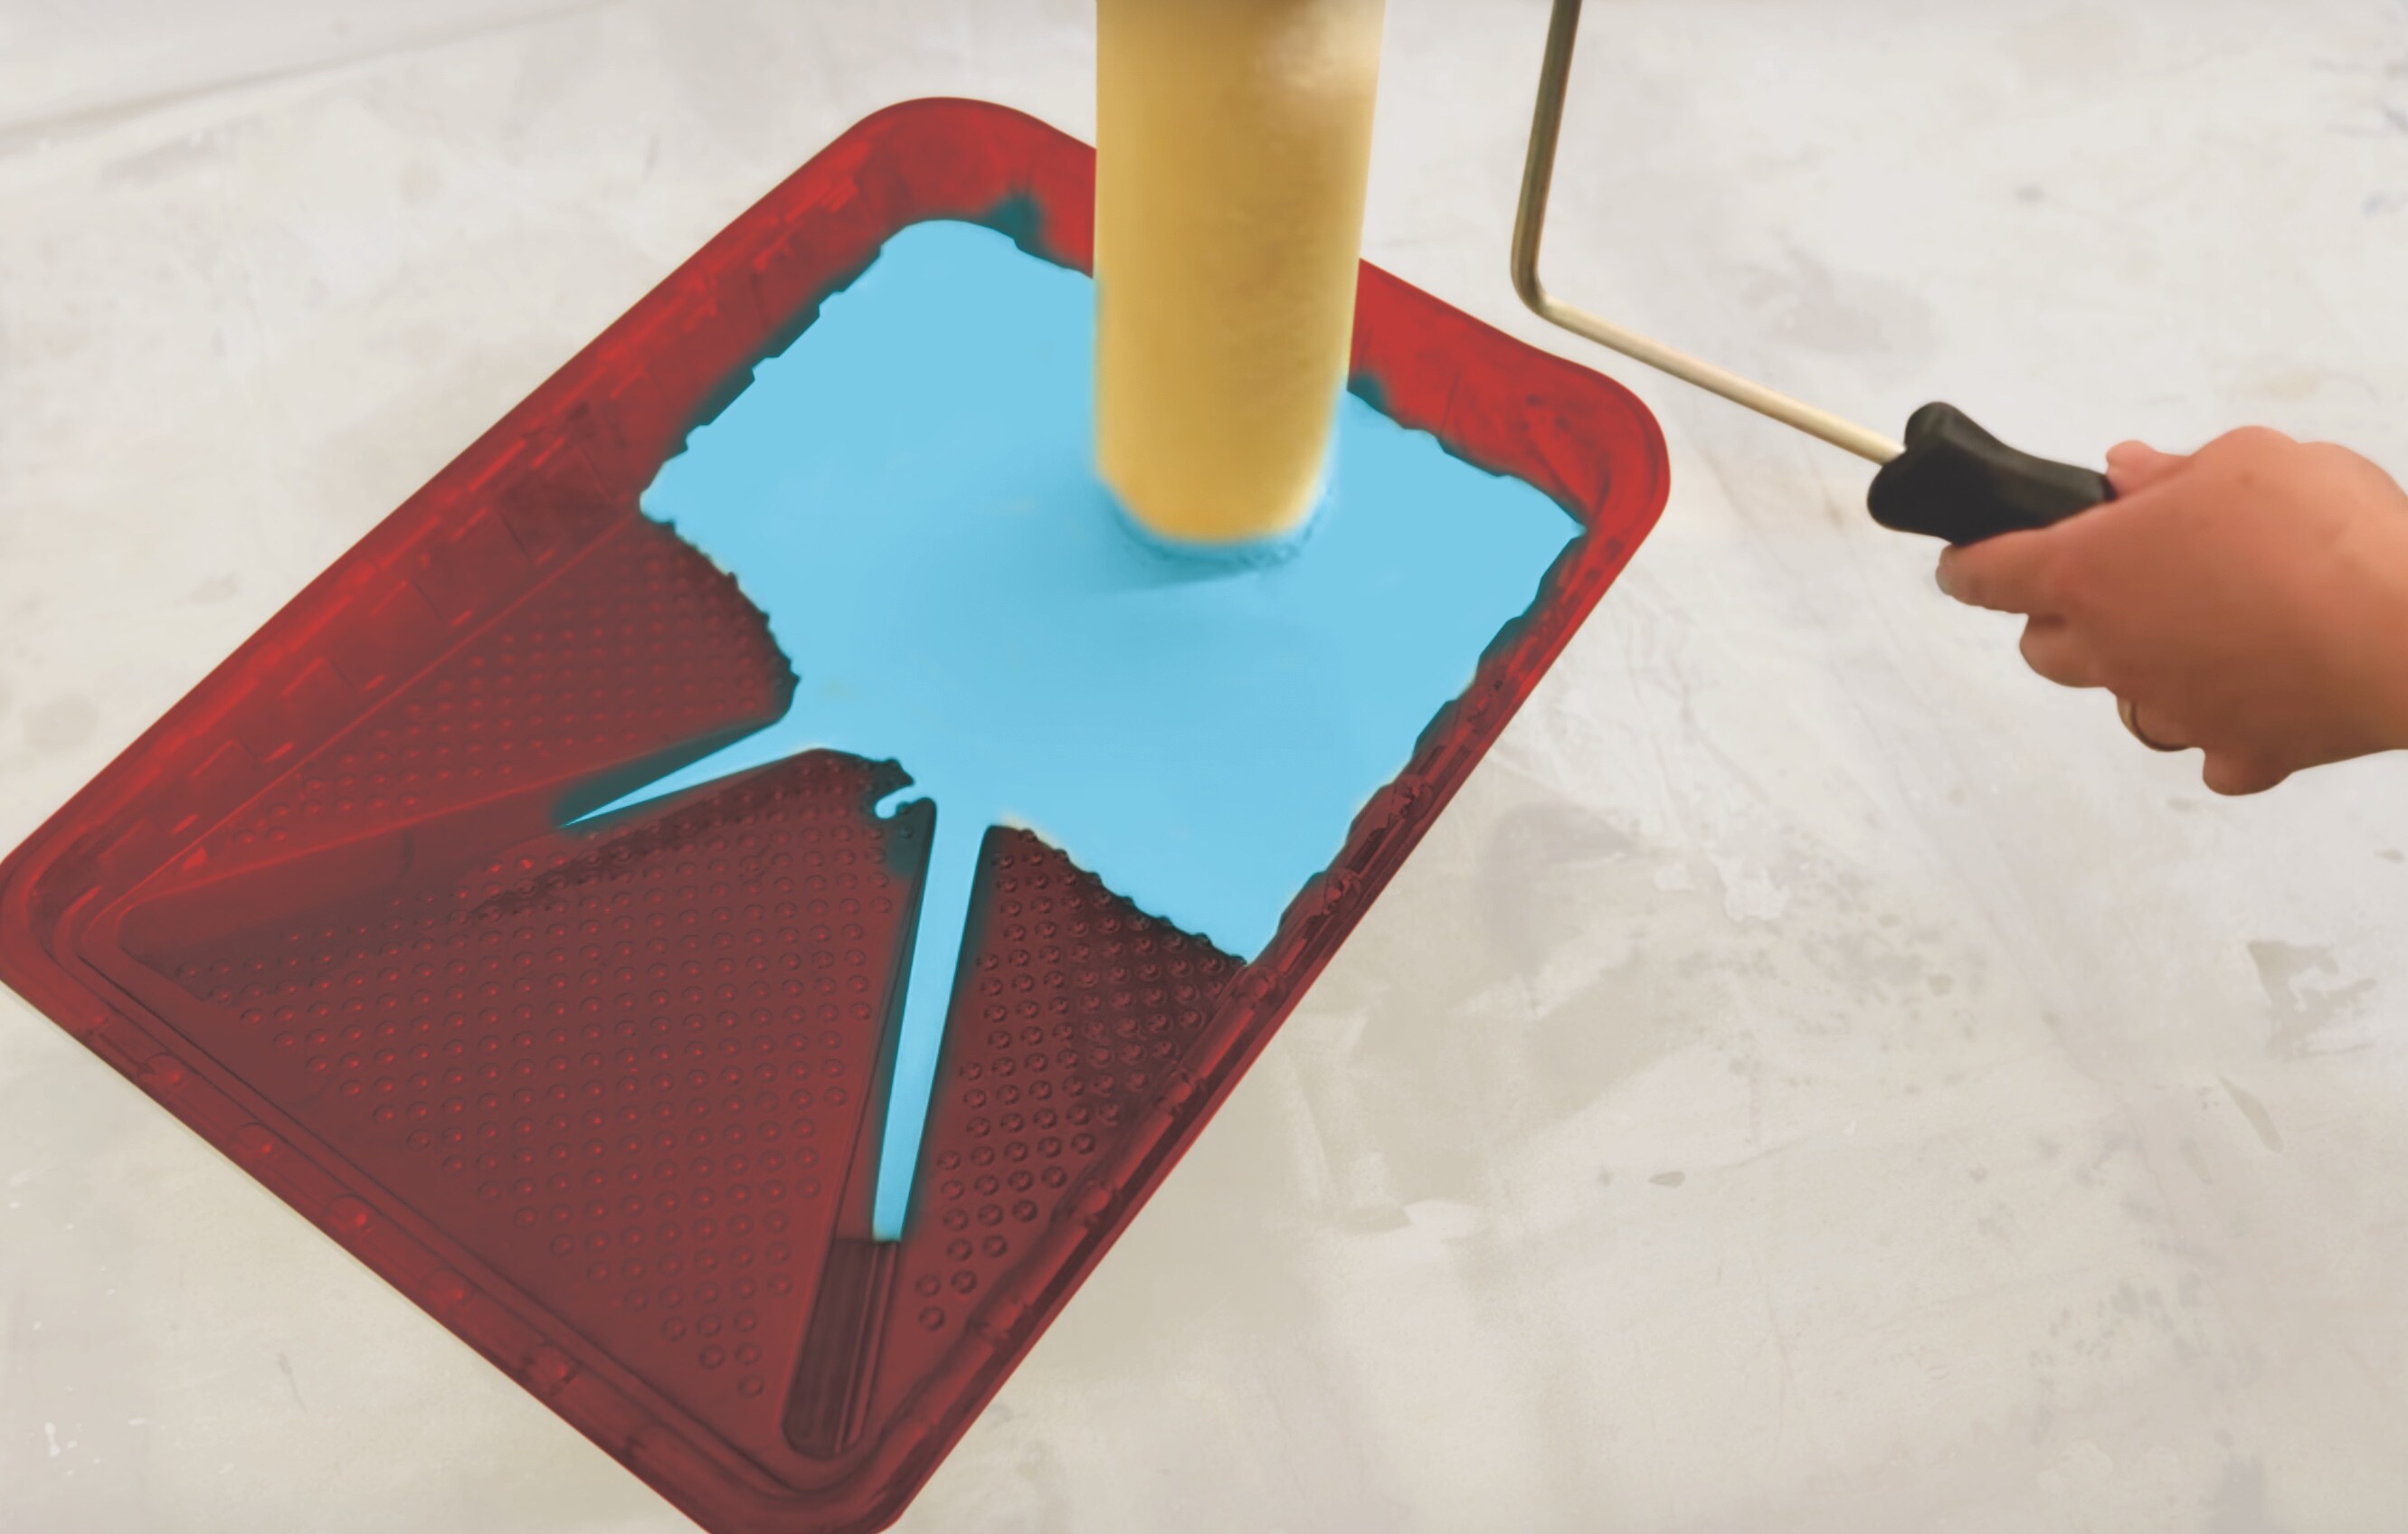 WHIZZ 3-in x 6.375-in WHIZZ Multi Use Paint Pad and Edger Paint Edger in  the Specialty Paint Applicators department at